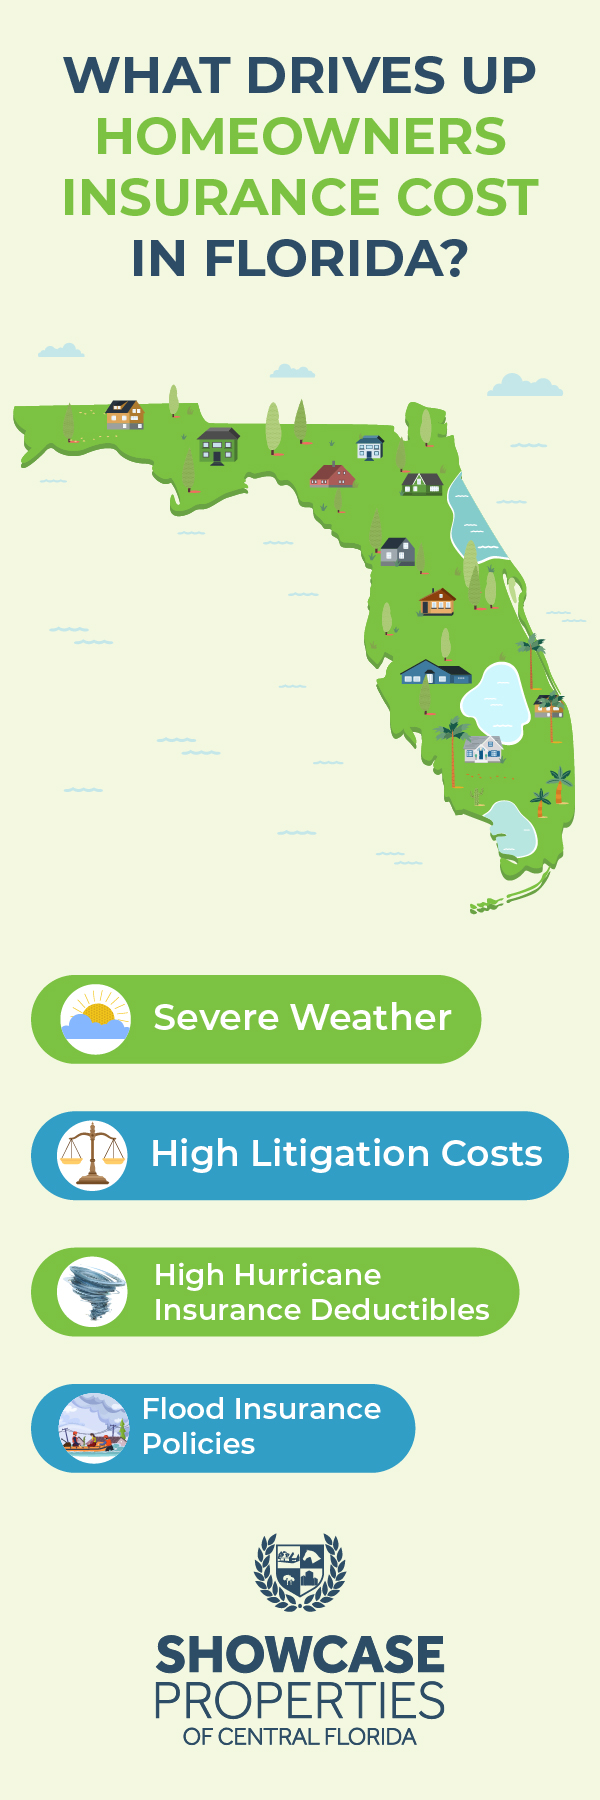 What Drives Up Homeowners Insurance Cost in Florida? 1. Severe Weather 2. High Litigation Costs 3. High Hurricane Insurance Deductibles<br />
5. Flood Insurance Policies  - Graphic of the state of Florida and houses